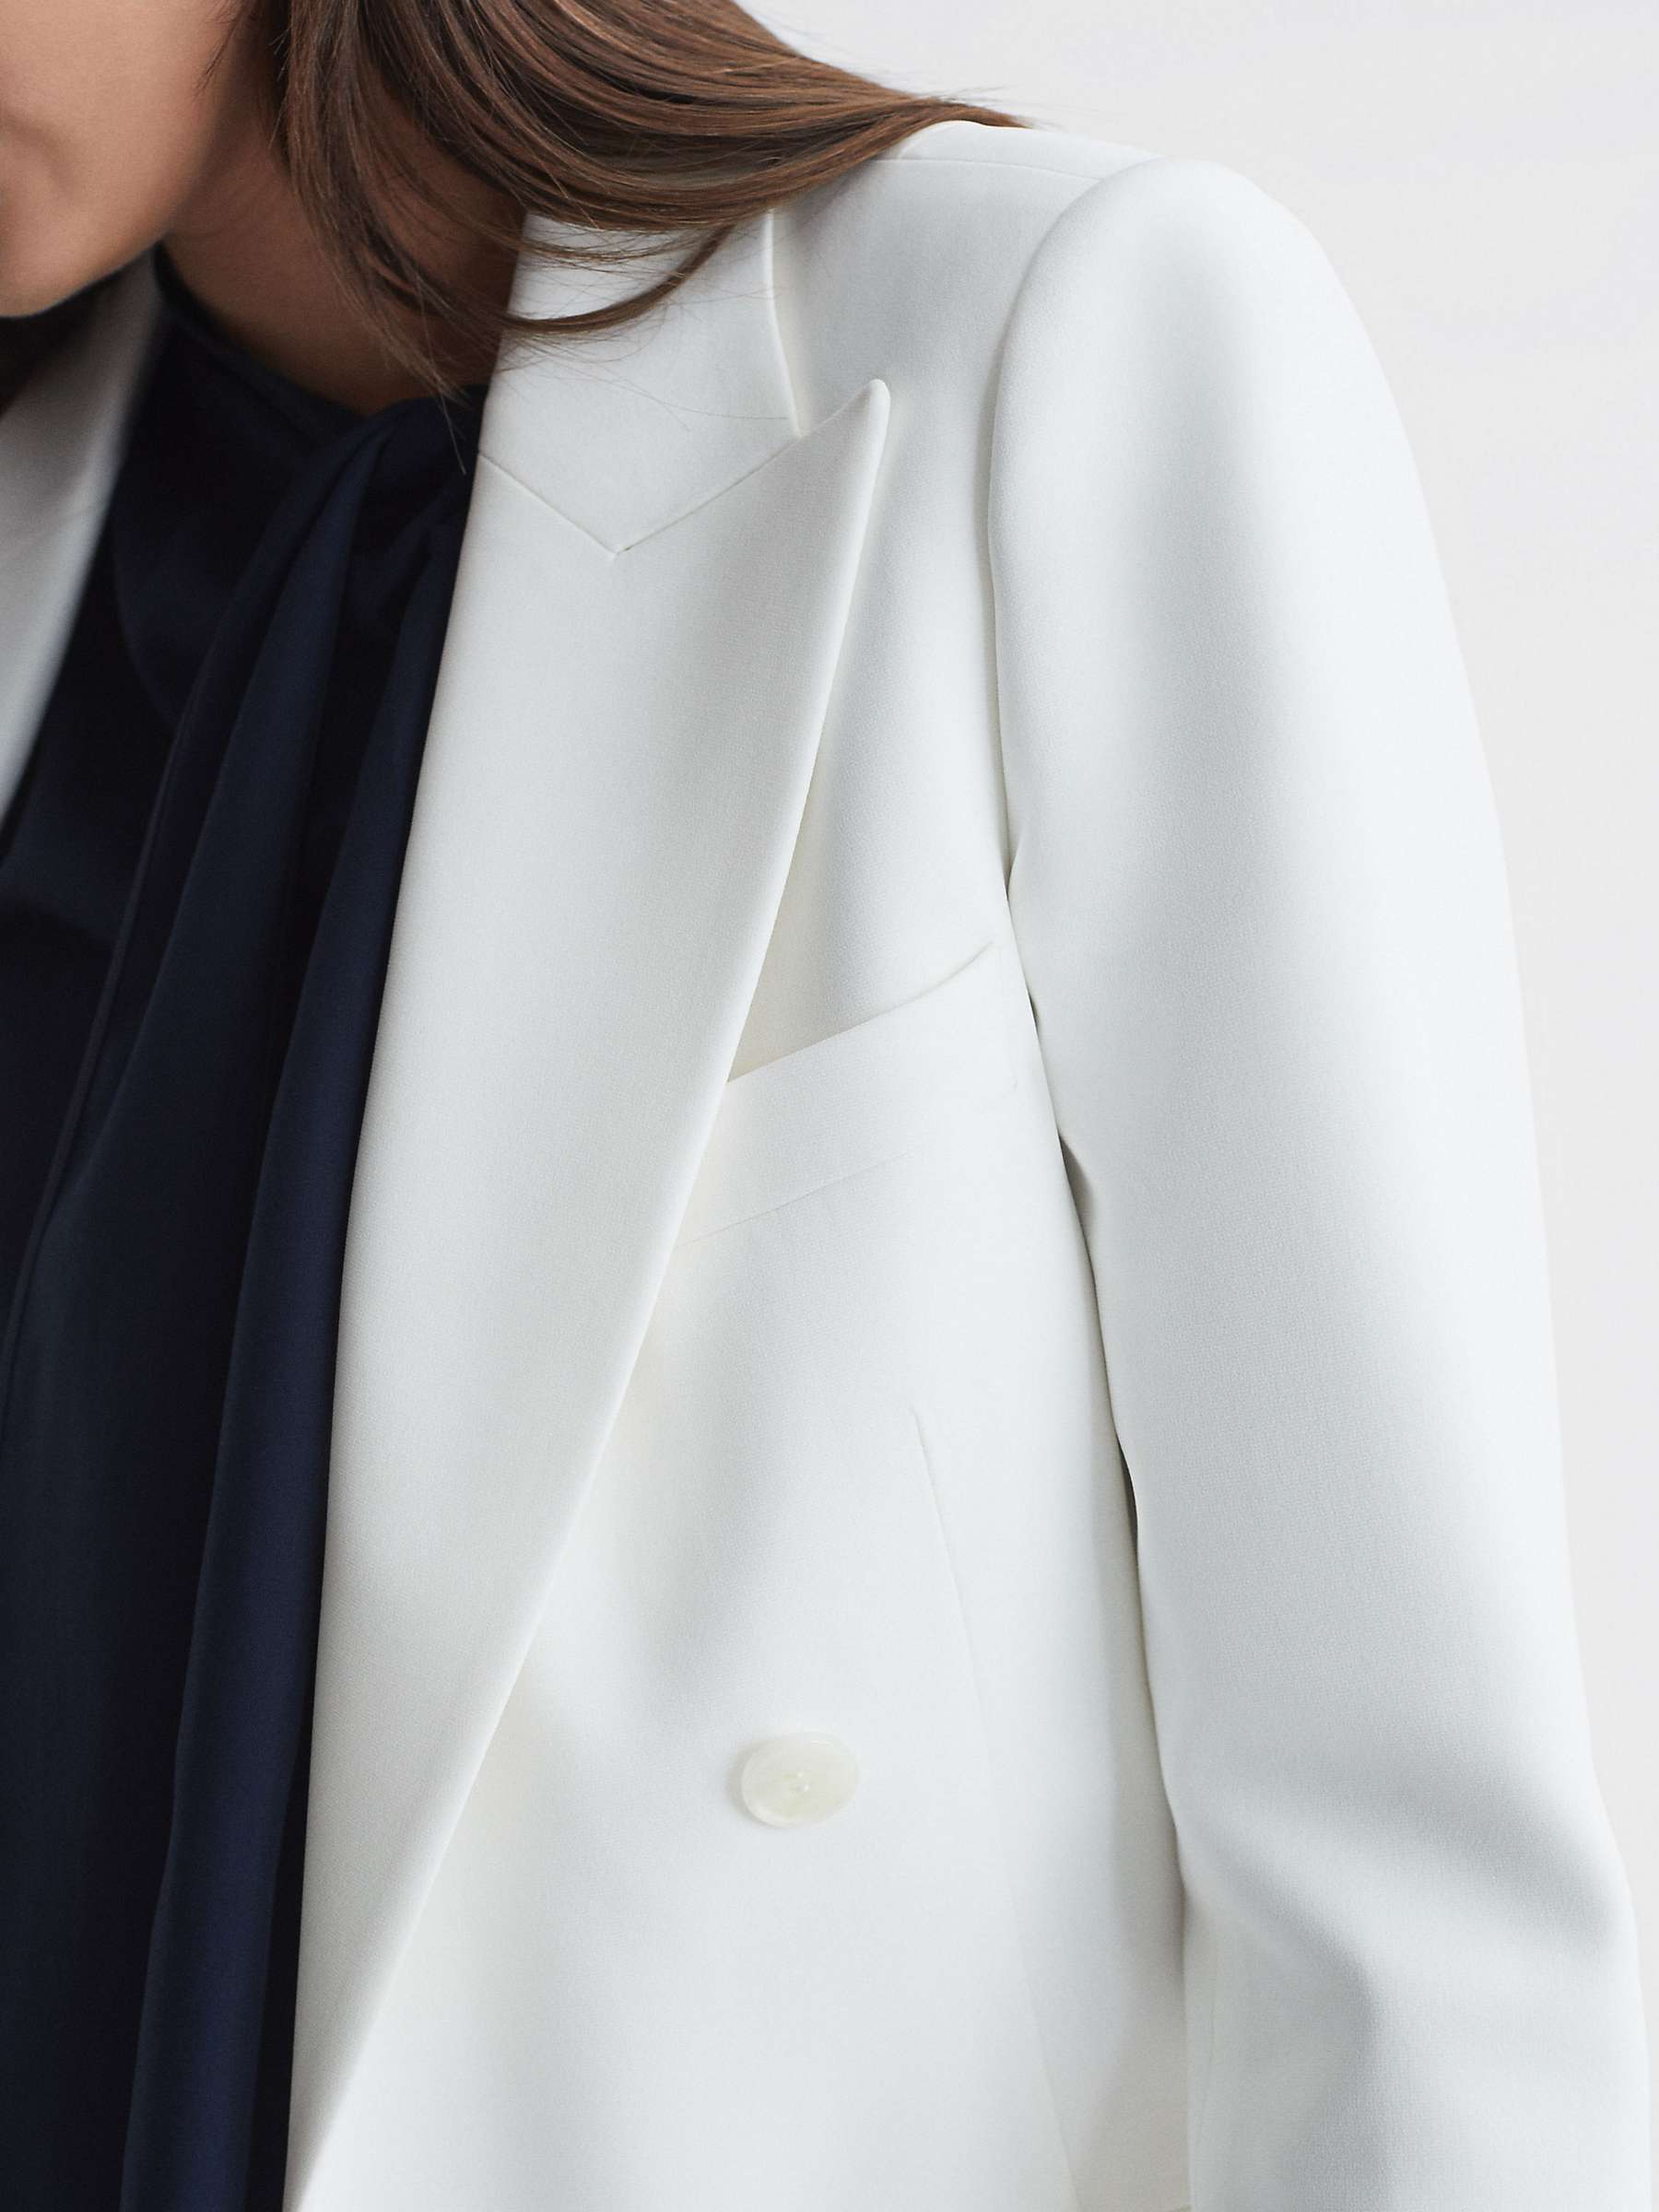 Buy Reiss Sienna Double Breasted Crepe Blazer, White Online at johnlewis.com